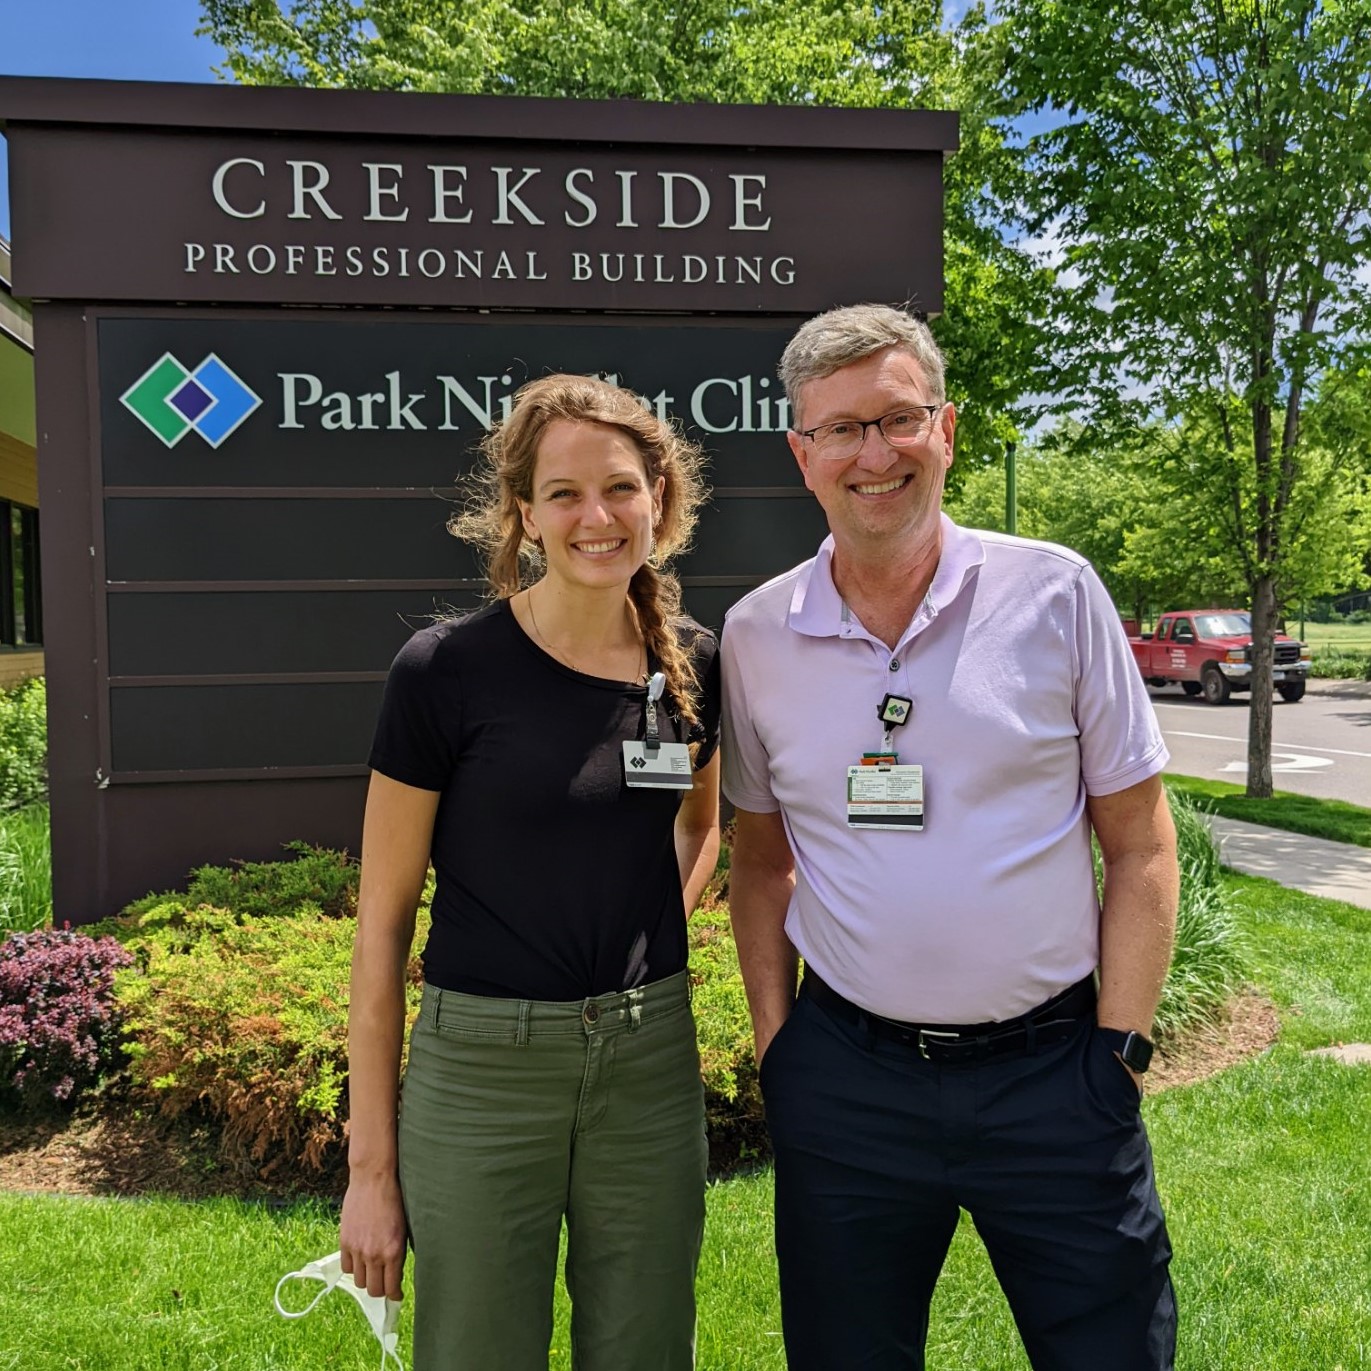 Student and preceptor in front of Creekside sign